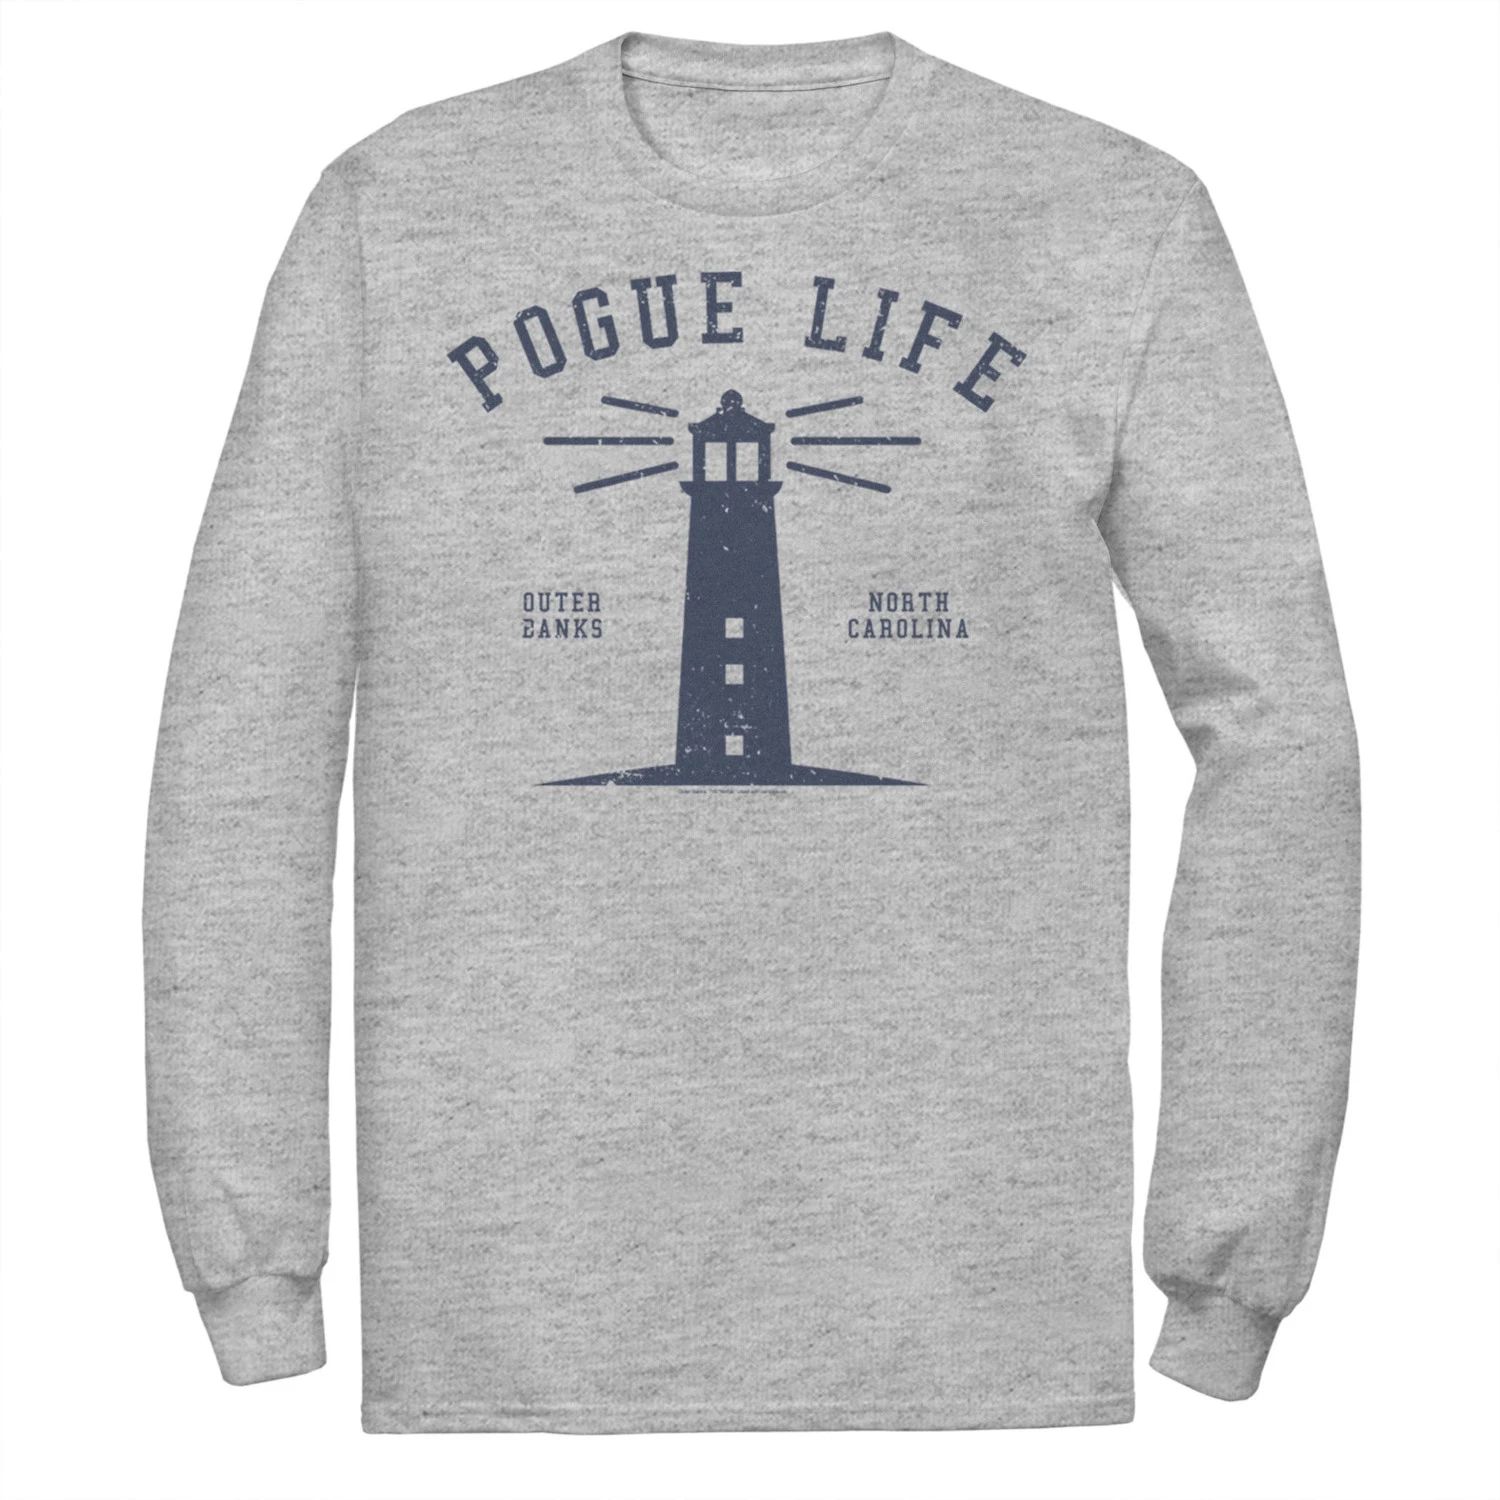 Мужская футболка Outer Banks Pogue Life Lighthouse Licensed Character мужская футболка outer banks pogue life lighthouse licensed character